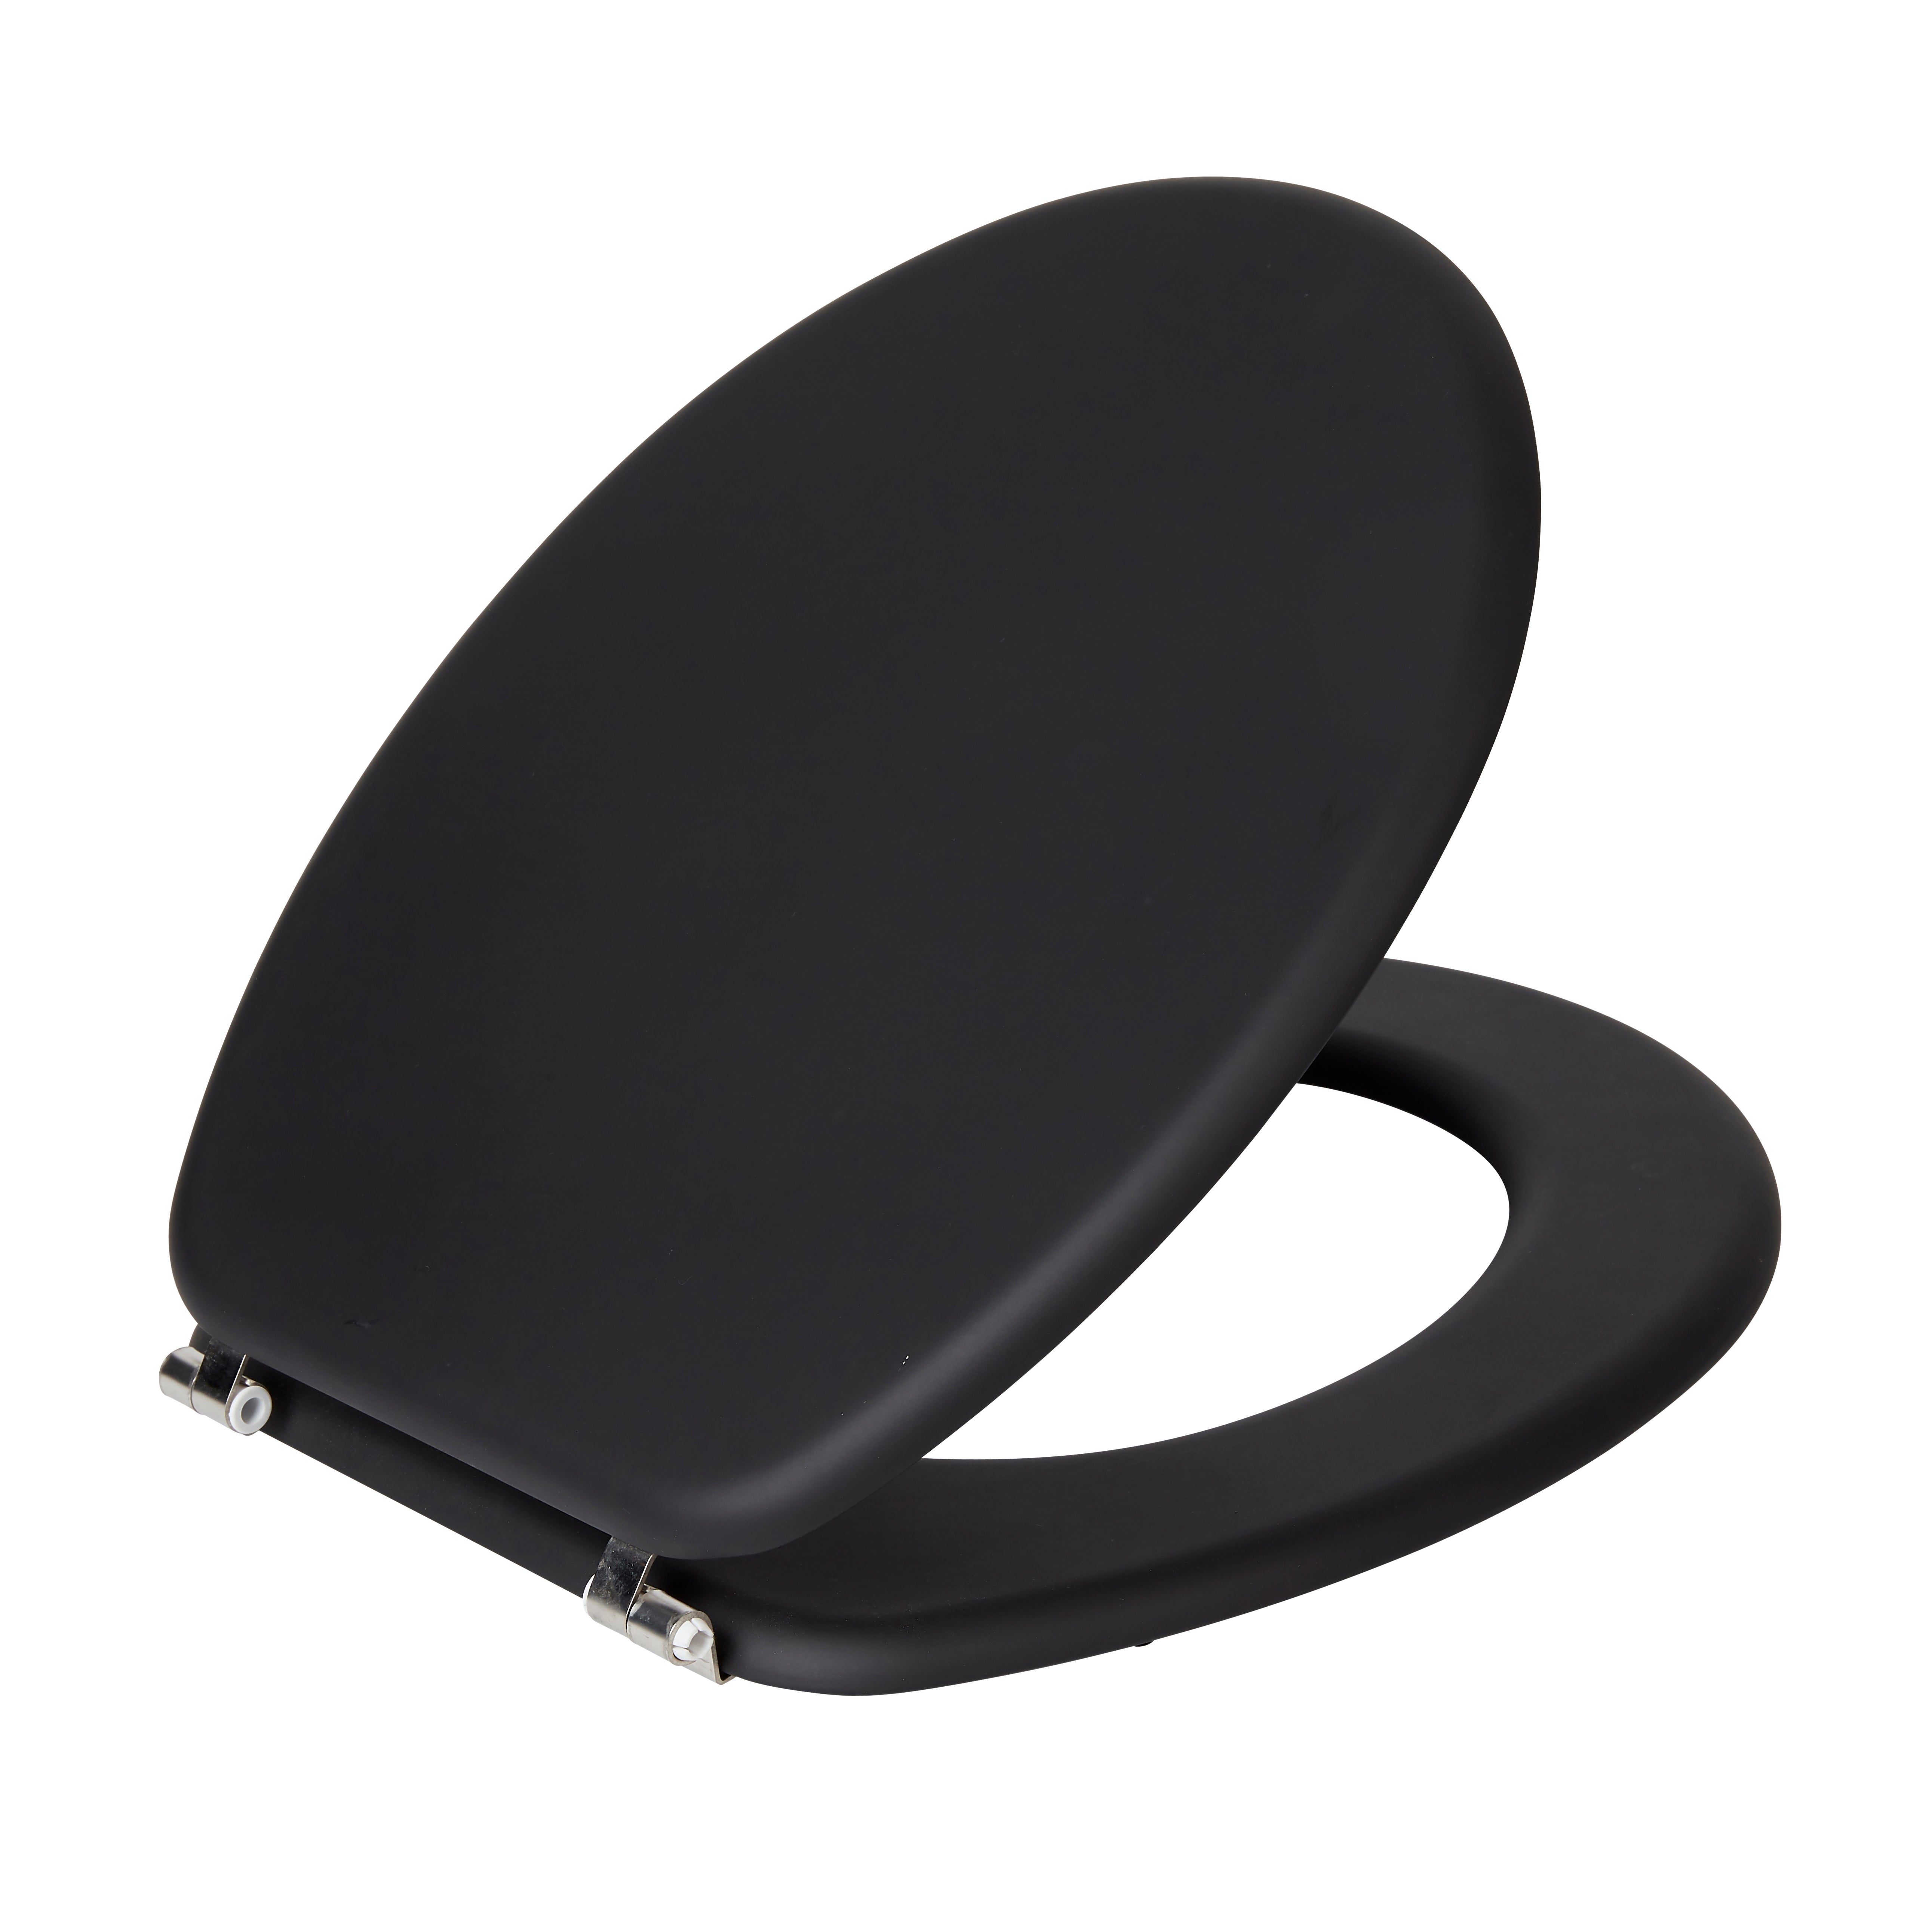 Black Soft Touch Toilet Seat